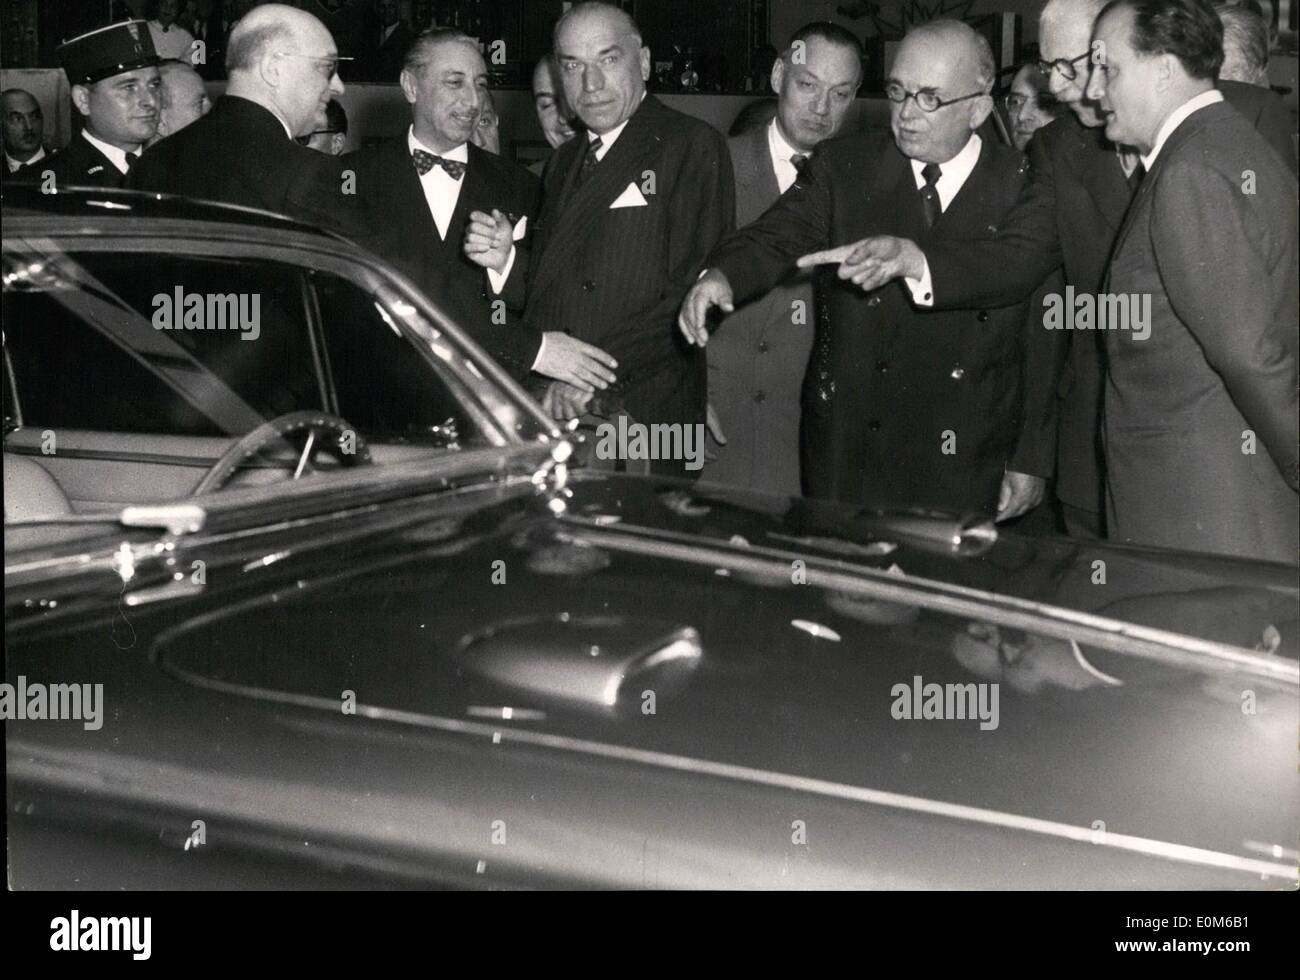 Oct. 10, 1953 - President Auriol Visits Paris Motor Show. President Vincent Auriol escorted by M. Andre Marie, Minister of National Education, and M. Louvel, Minister of Industry, visits the Motor Show which opened at the Grand Palais, Paris, Yesterday. Stock Photo